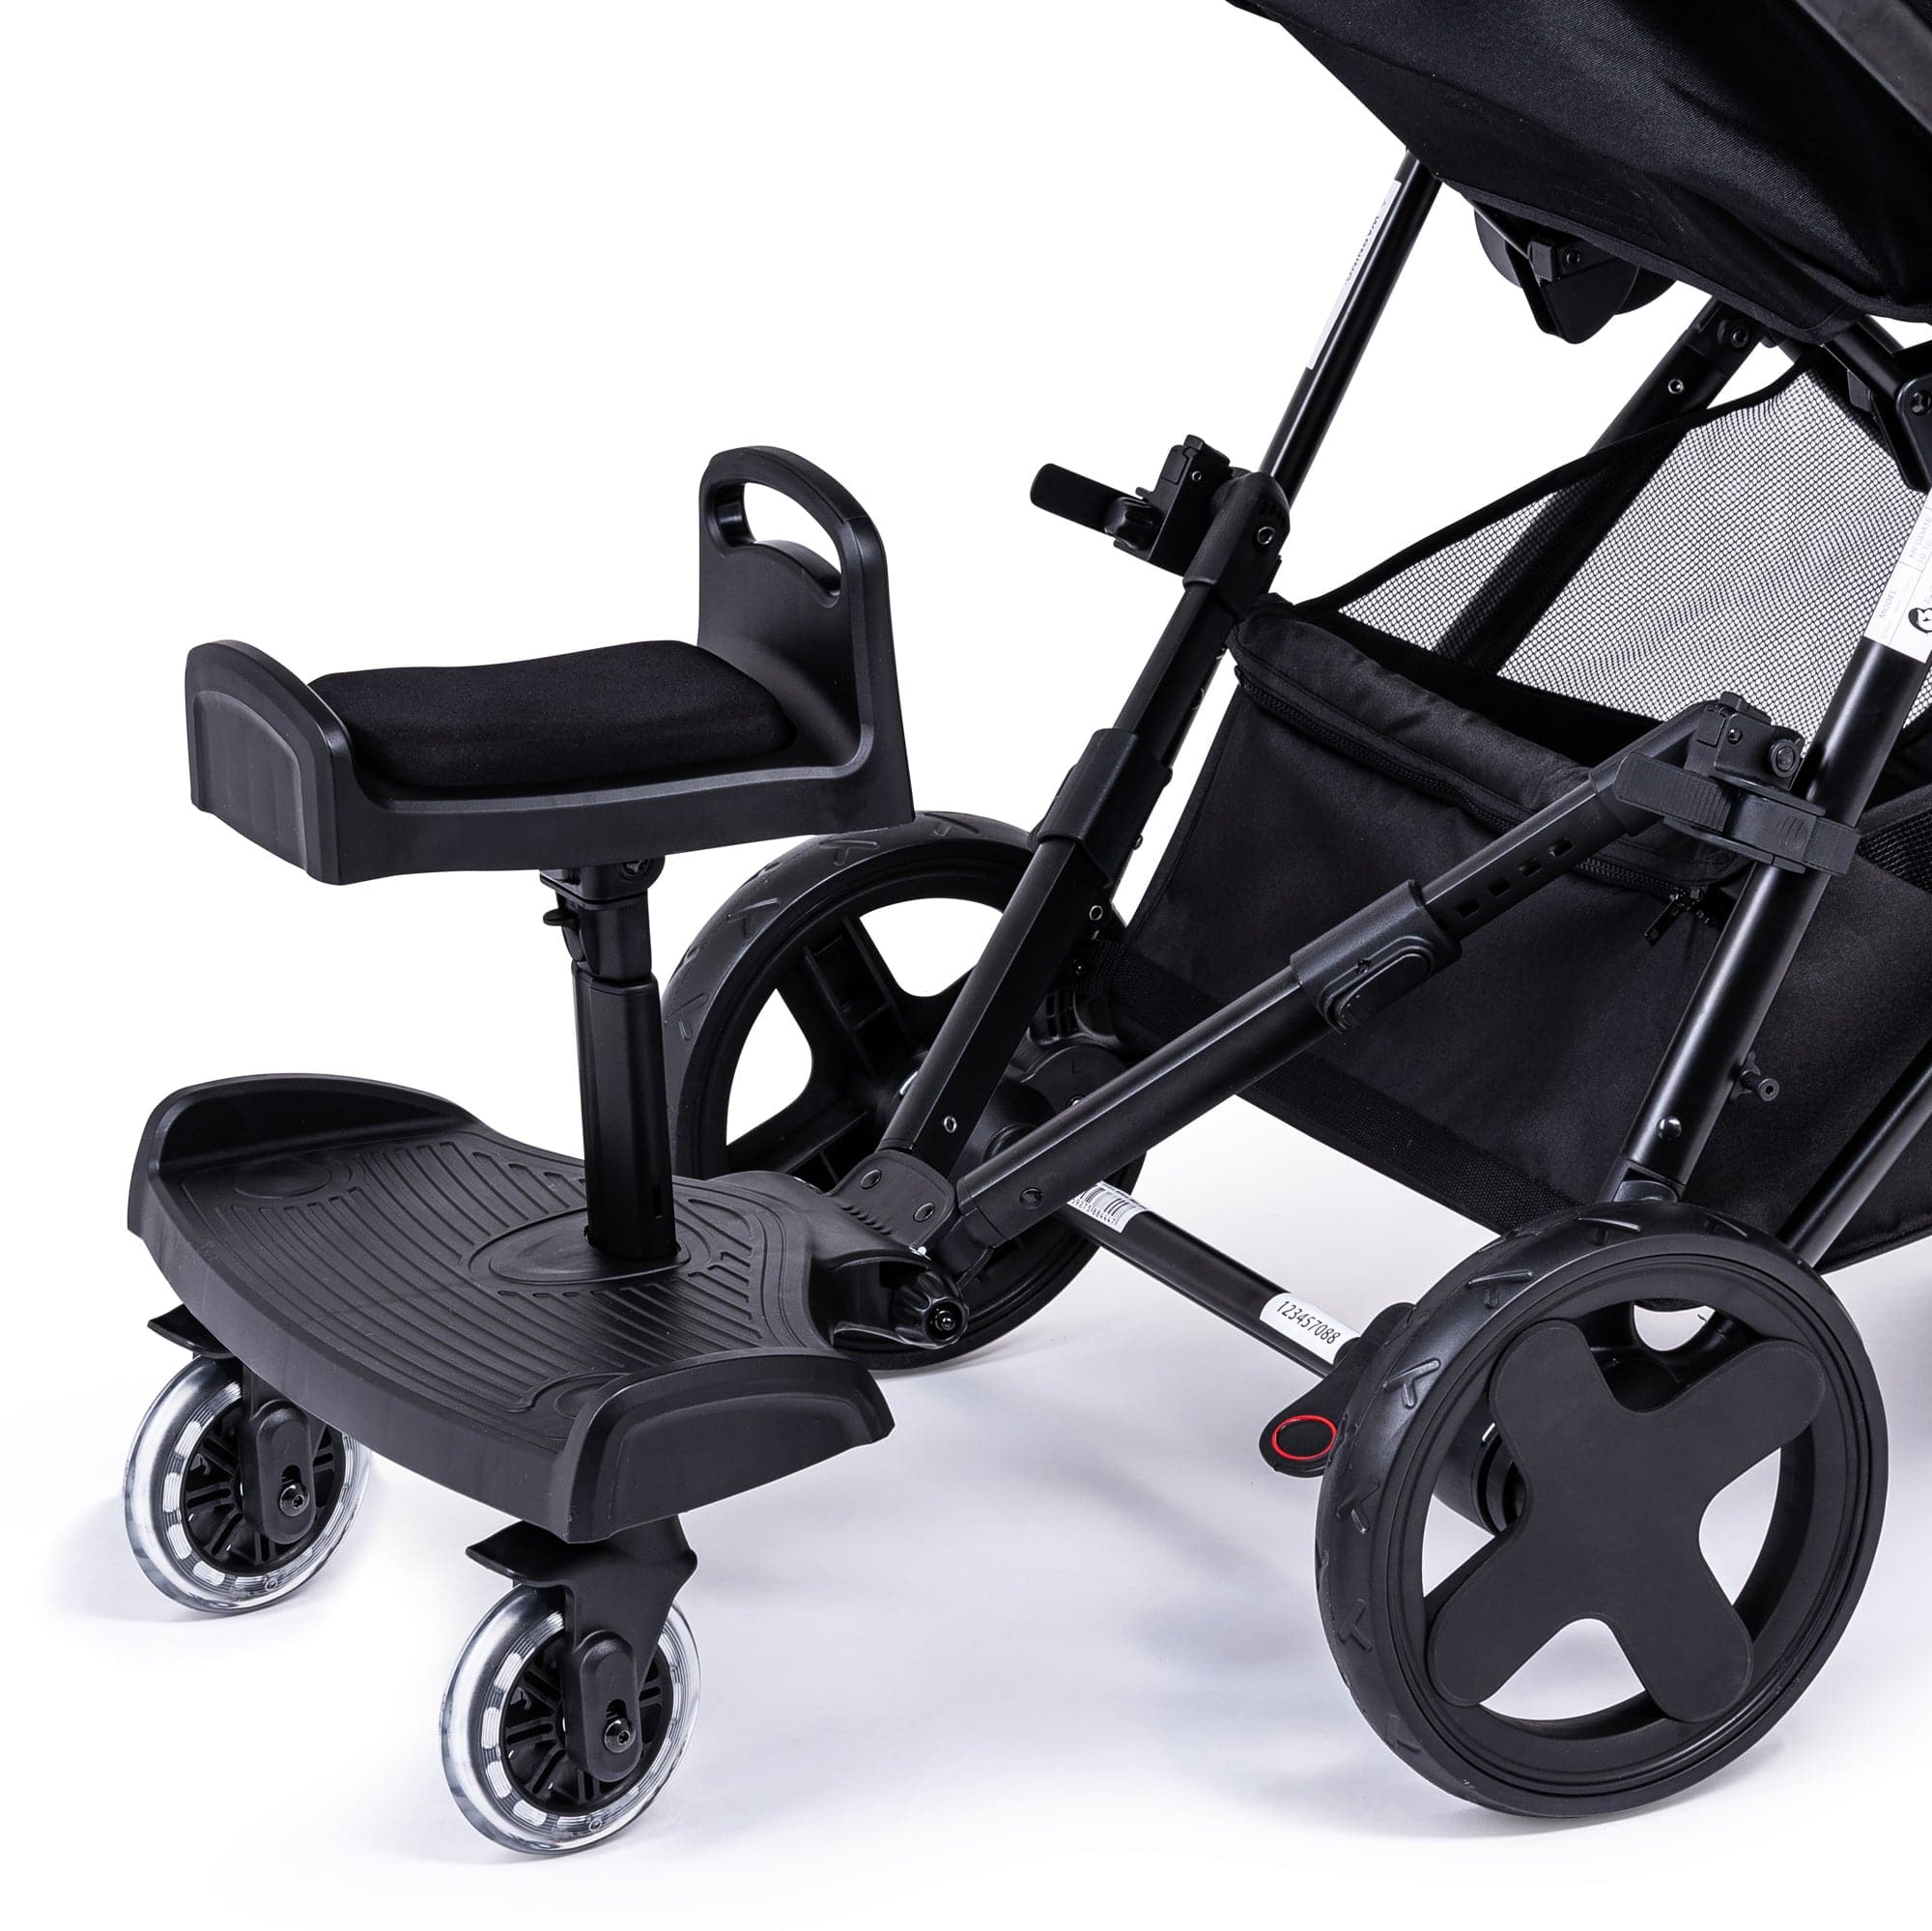 Ride On Board with Seat Compatible with Esprit - For Your Little One